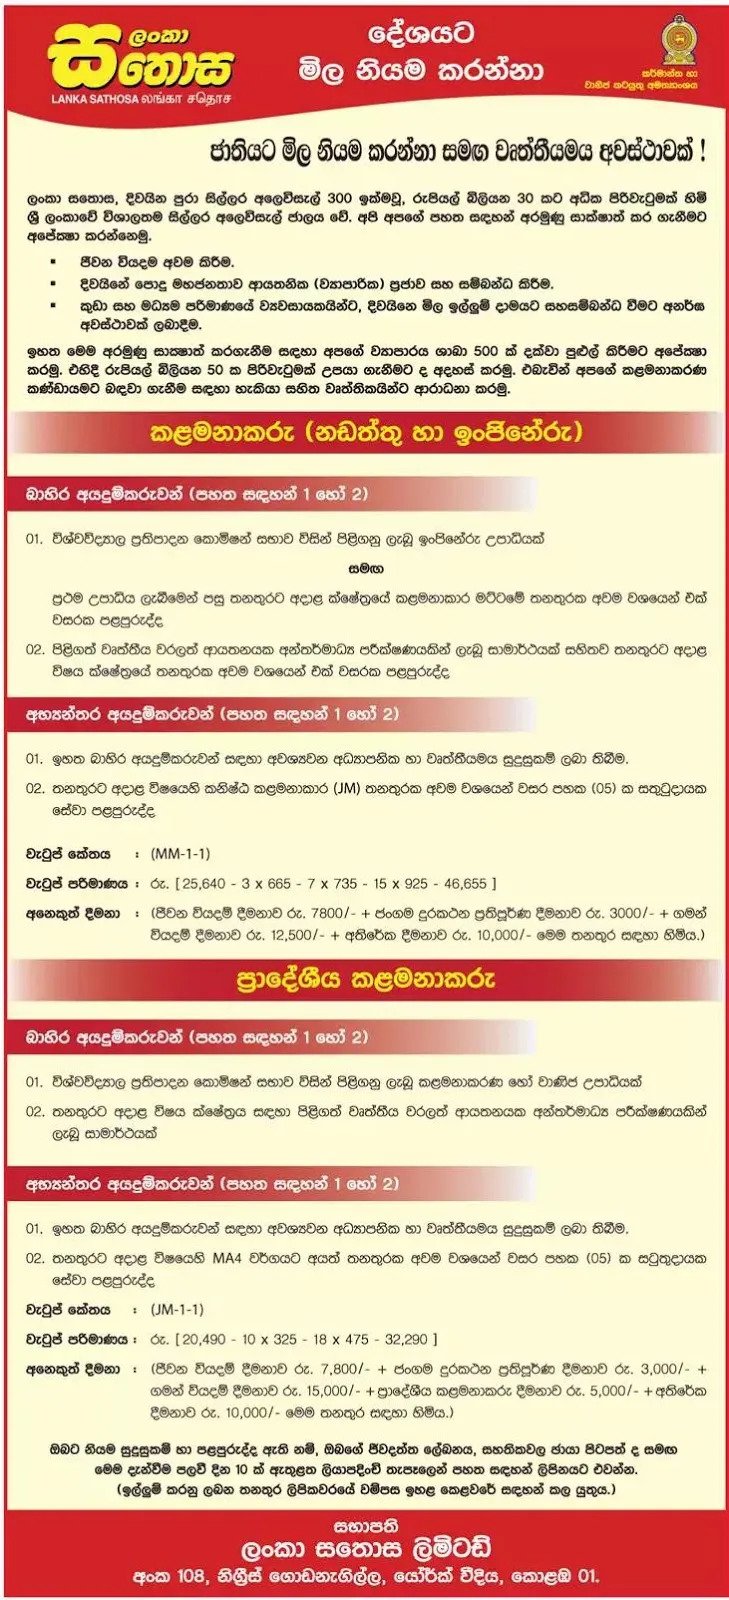 Manager / Area Manager Vacancies in Lanka Sathosa